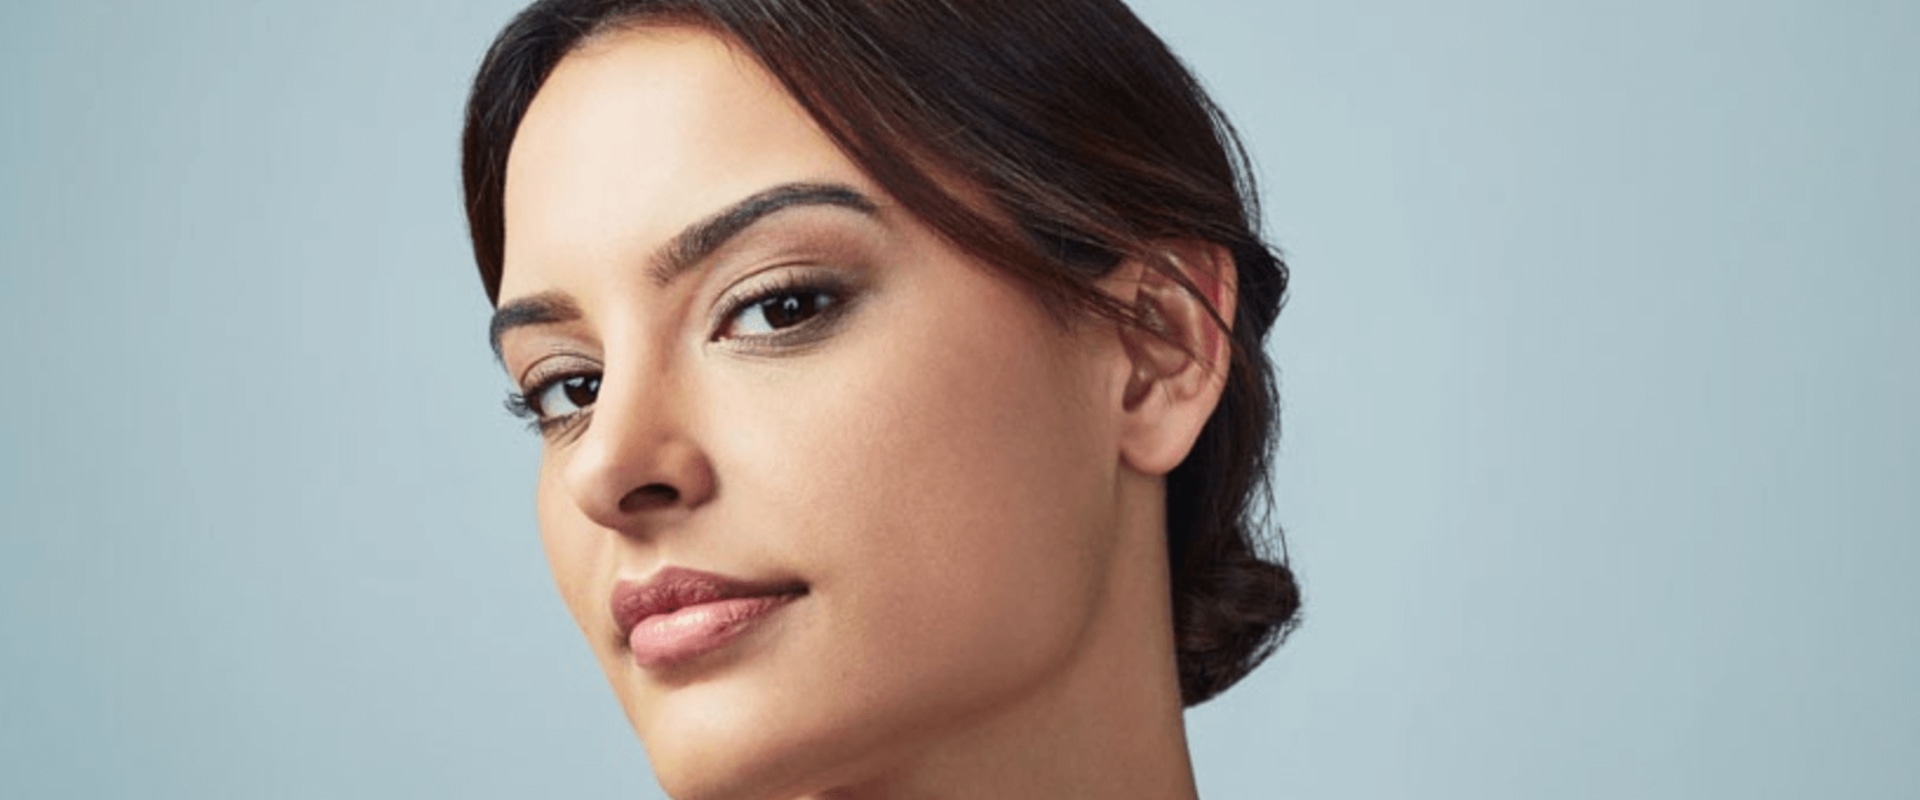 What Age is Right for Aesthetic Surgery?